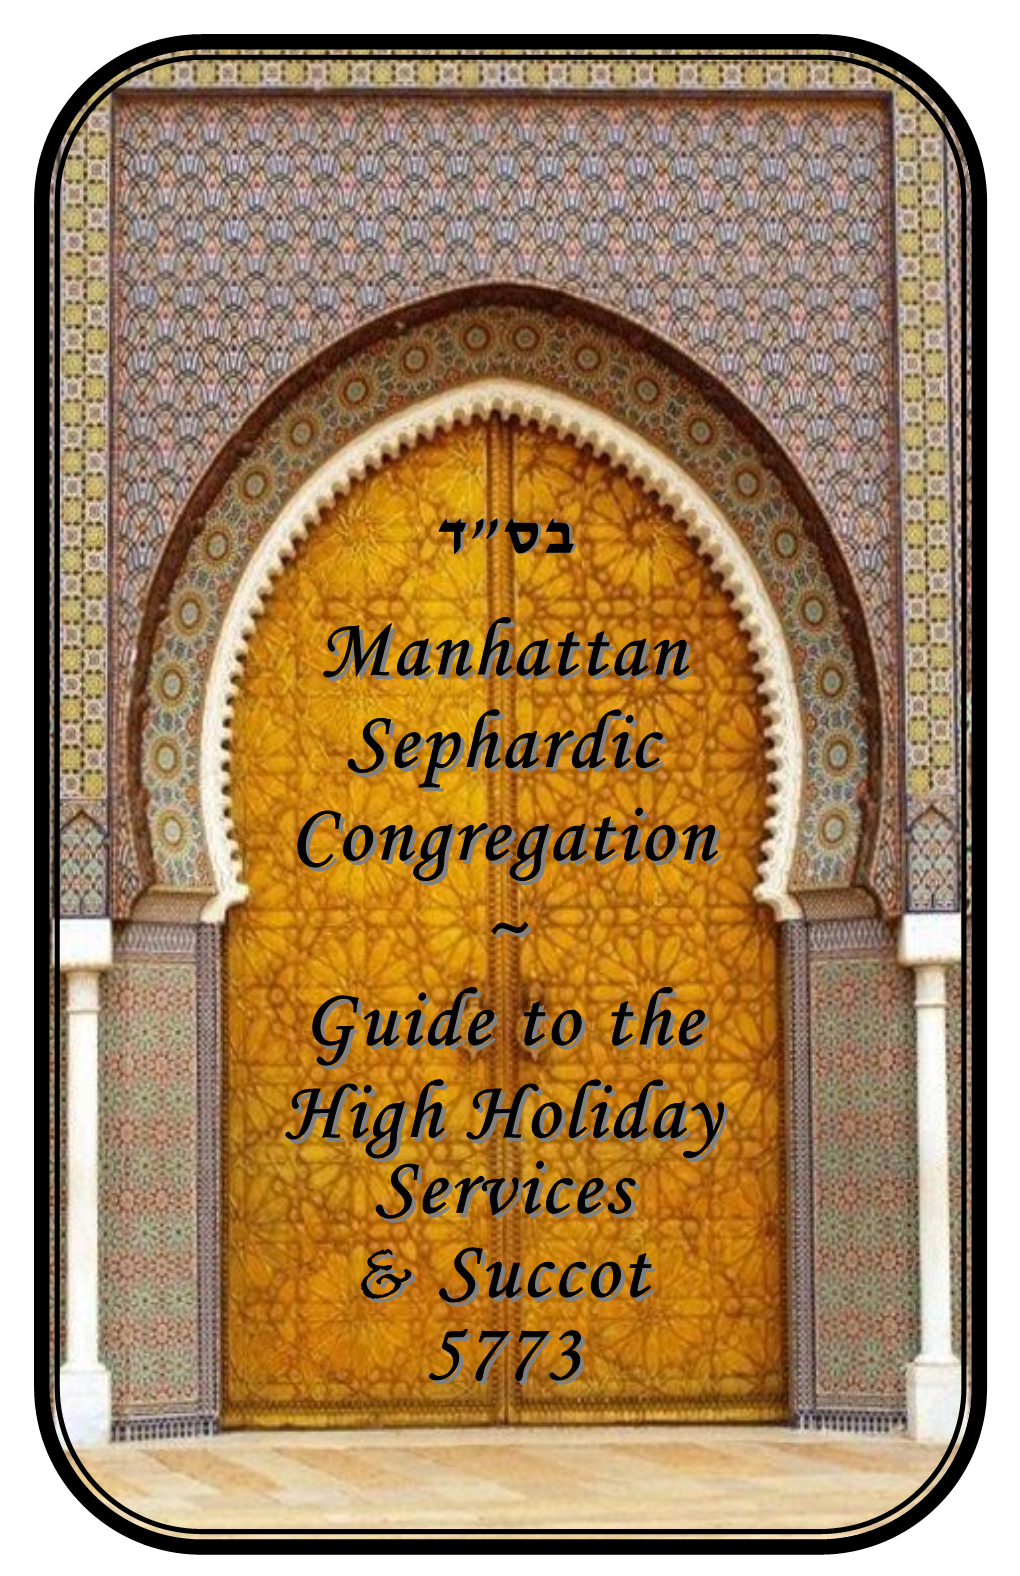 Manhattan Sephardic Congregation ~ Guide to the High Holiday Services